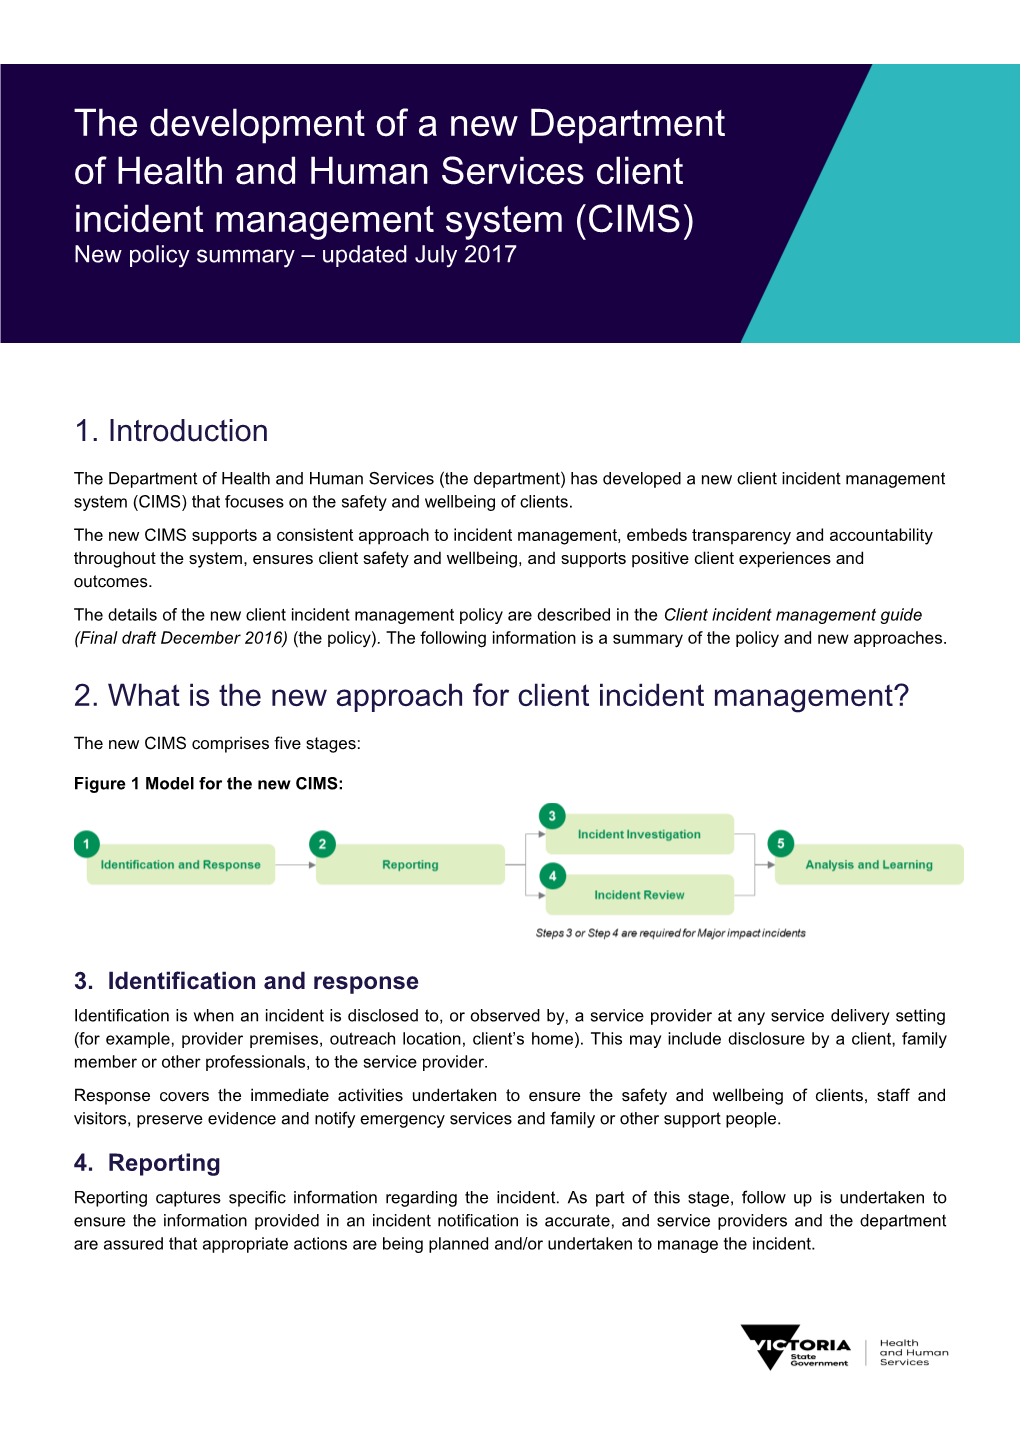 Client Incident Management System (CIMS) Policy Summary July 2017